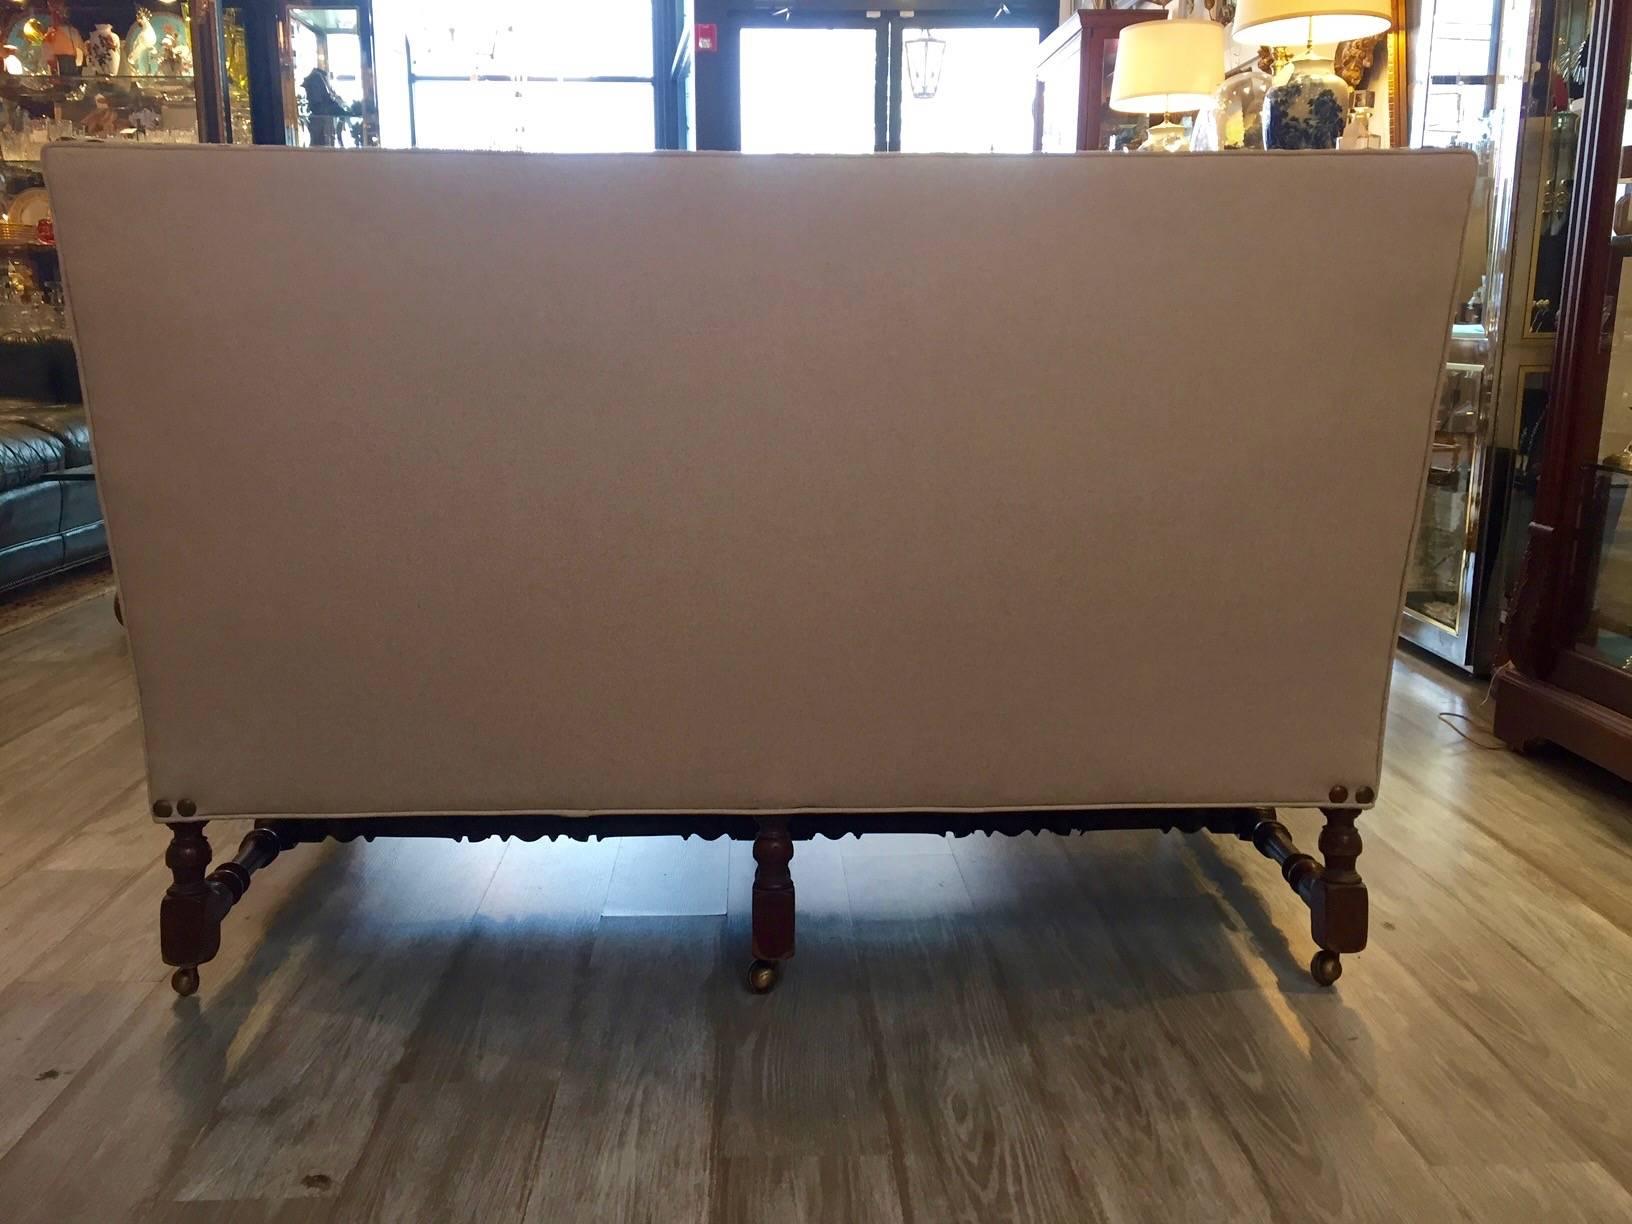 Great looking sophisticated vintage loveseat that sits on a gorgeous turned mahogany frame with brass casters, freshly upholstered in cream linen and stylishly finished with big brass hob nailheads around the bottom. One comfy seat cushion in soft